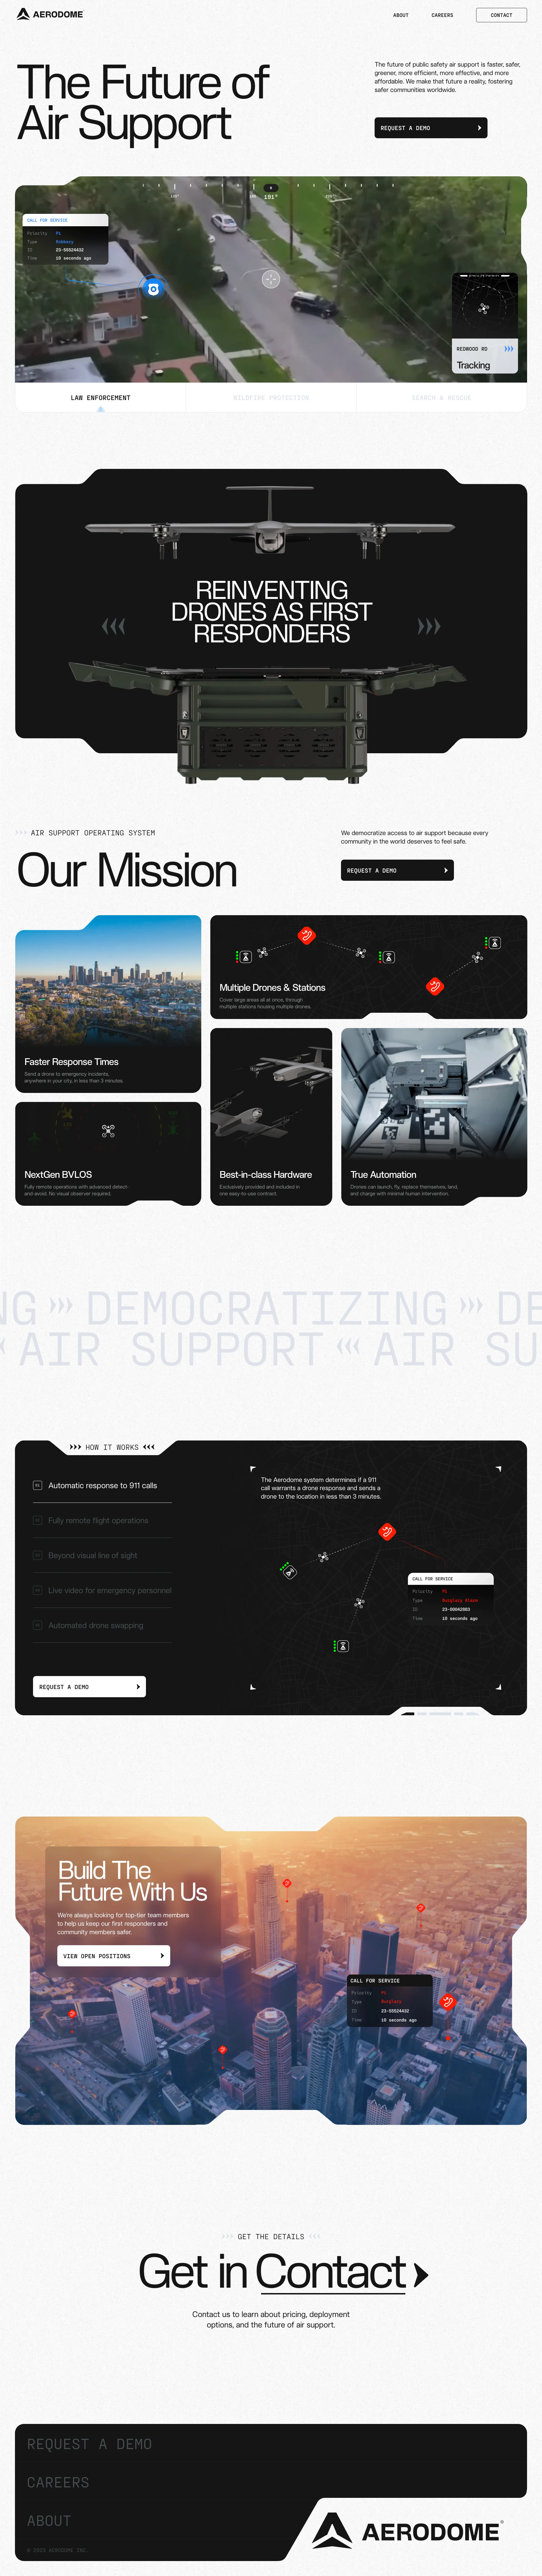 AERODOME Landing Page Example: The future of public safety air support is faster, safer, greener, more efficient, more effective, and more affordable. We make that future a reality, fostering safer communities worldwide.